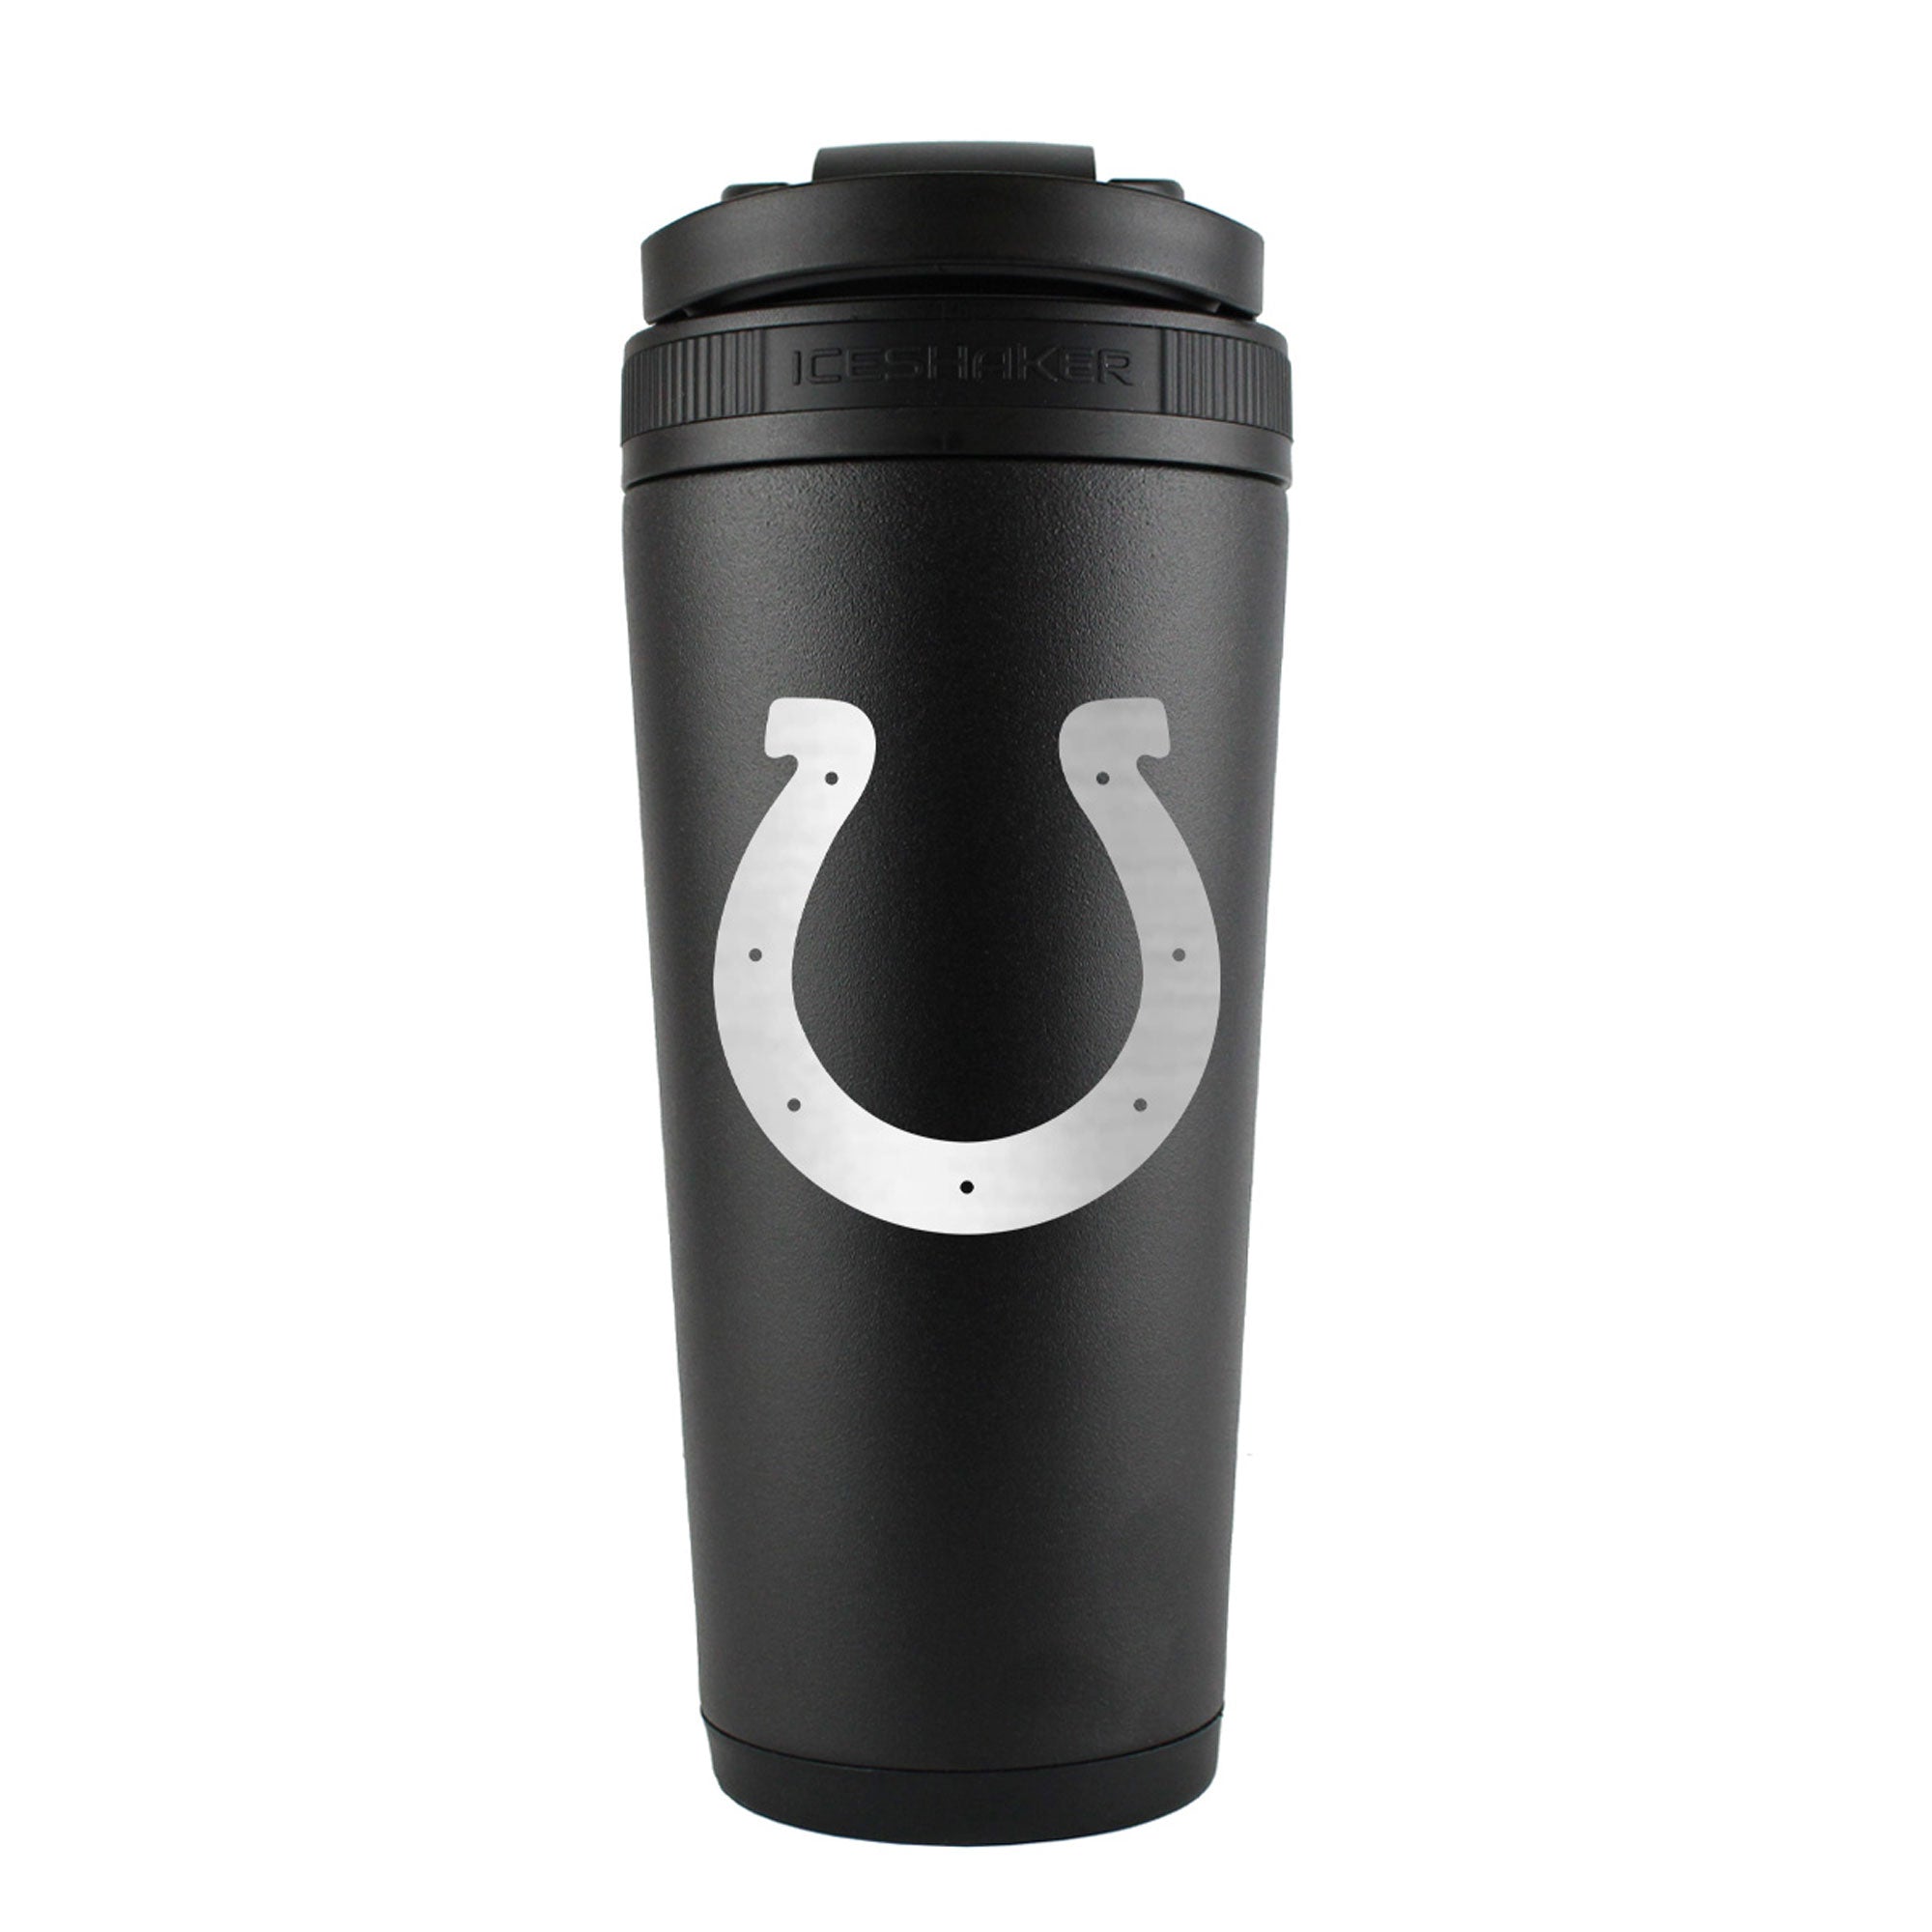 Indianapolis Colts 22oz. Canyon Water Bottle